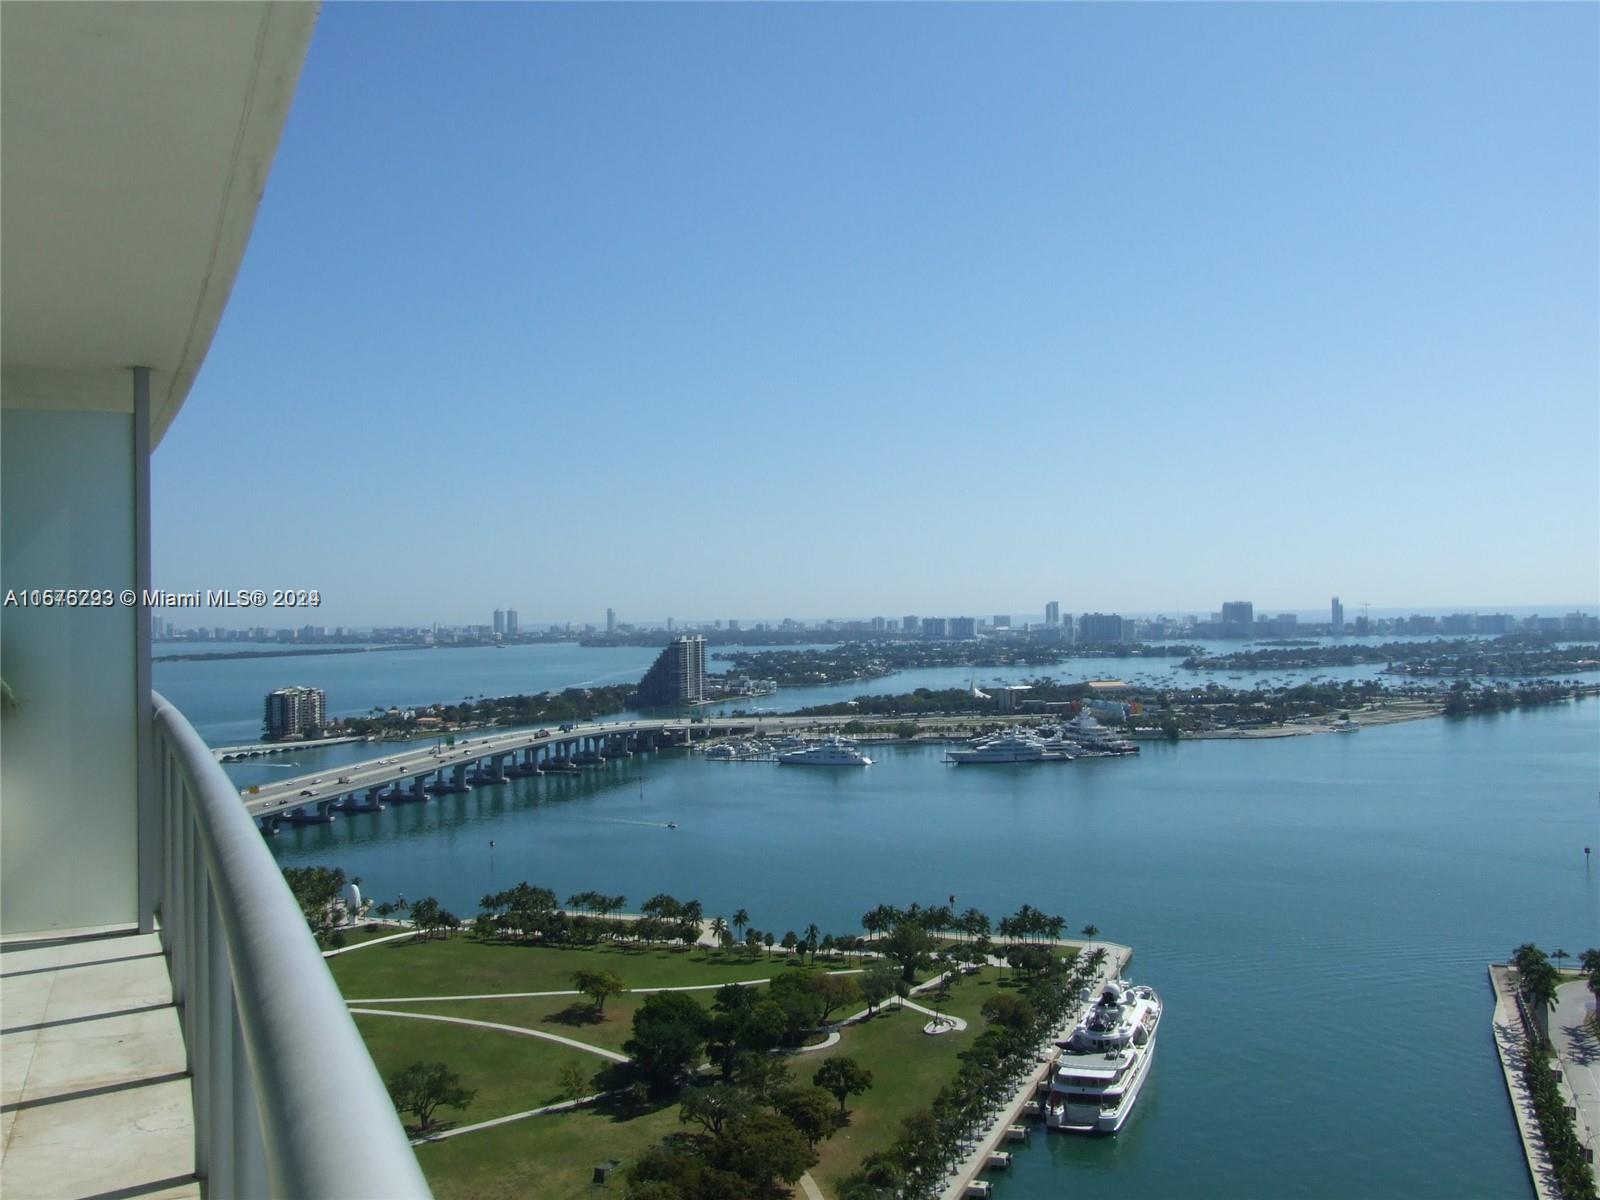 SPECTACULAR BAY VIEWS FROM EVERY ROOM IN THE SOUGHT-AFTER MARINA BLUE! HIGH FLOOR RESIDENCE, DIRECT 